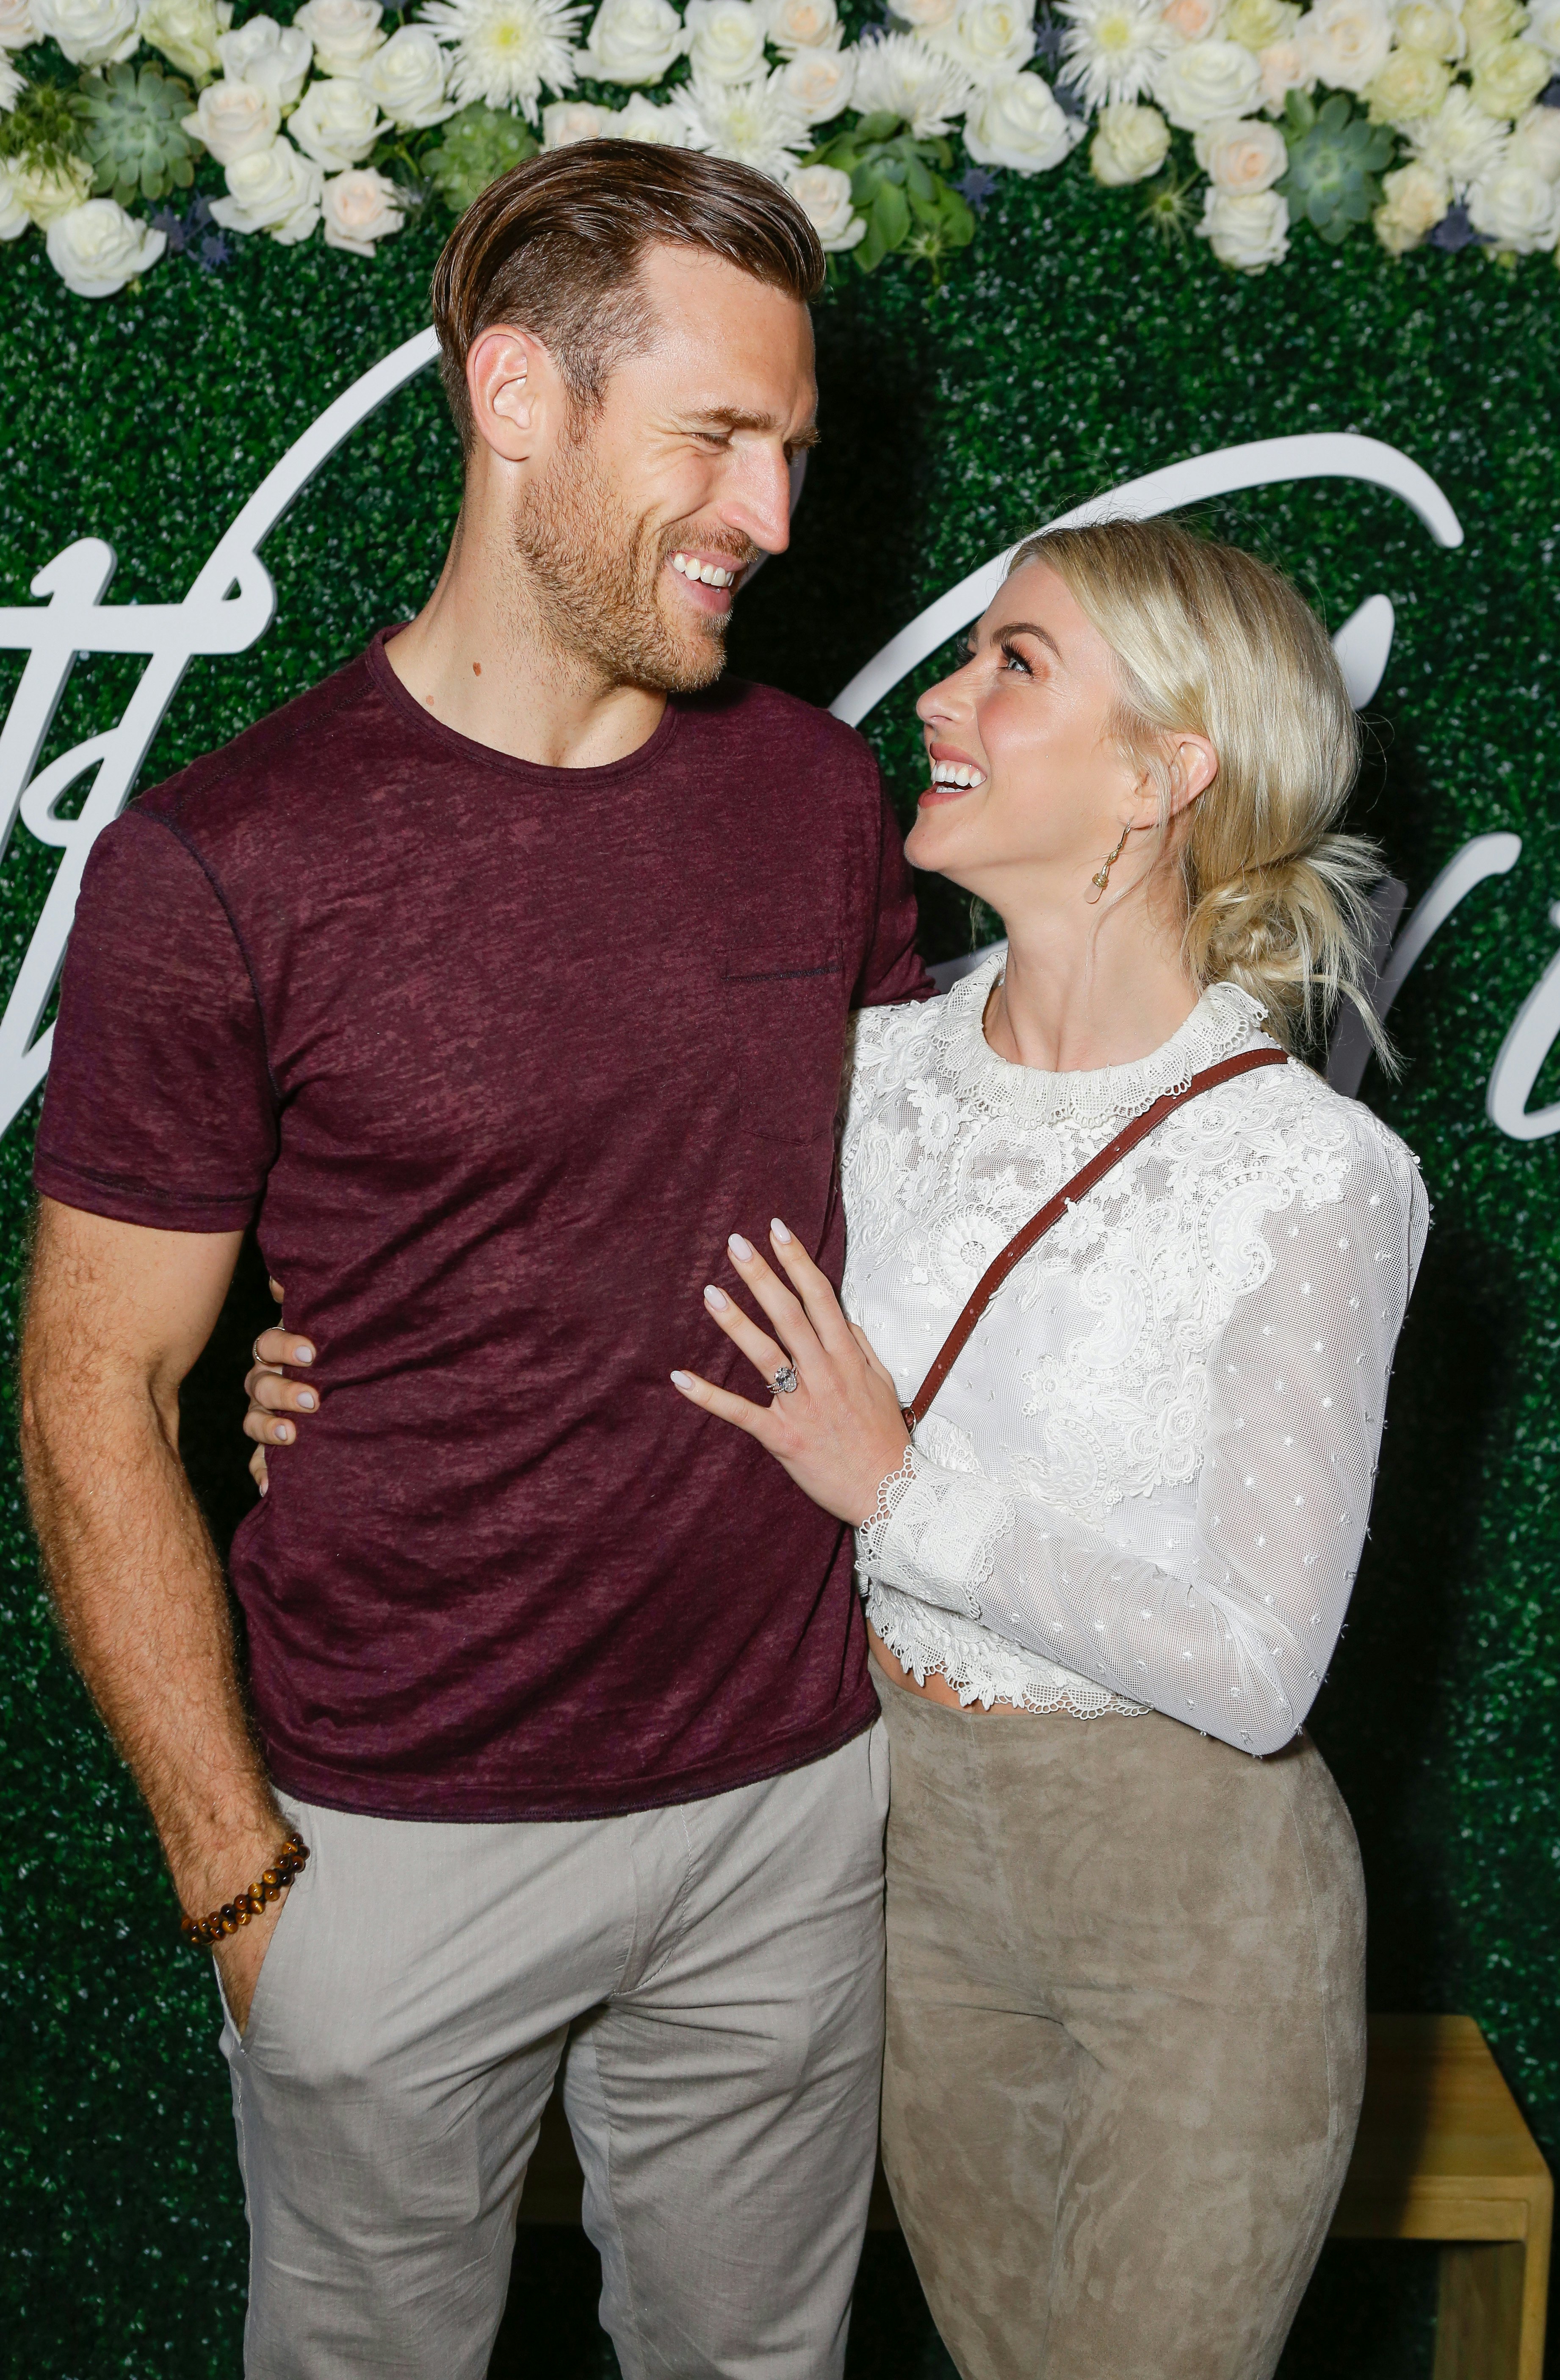 Julianne Hough & Brooks Laich’s Astrological Compatibility Is Intense